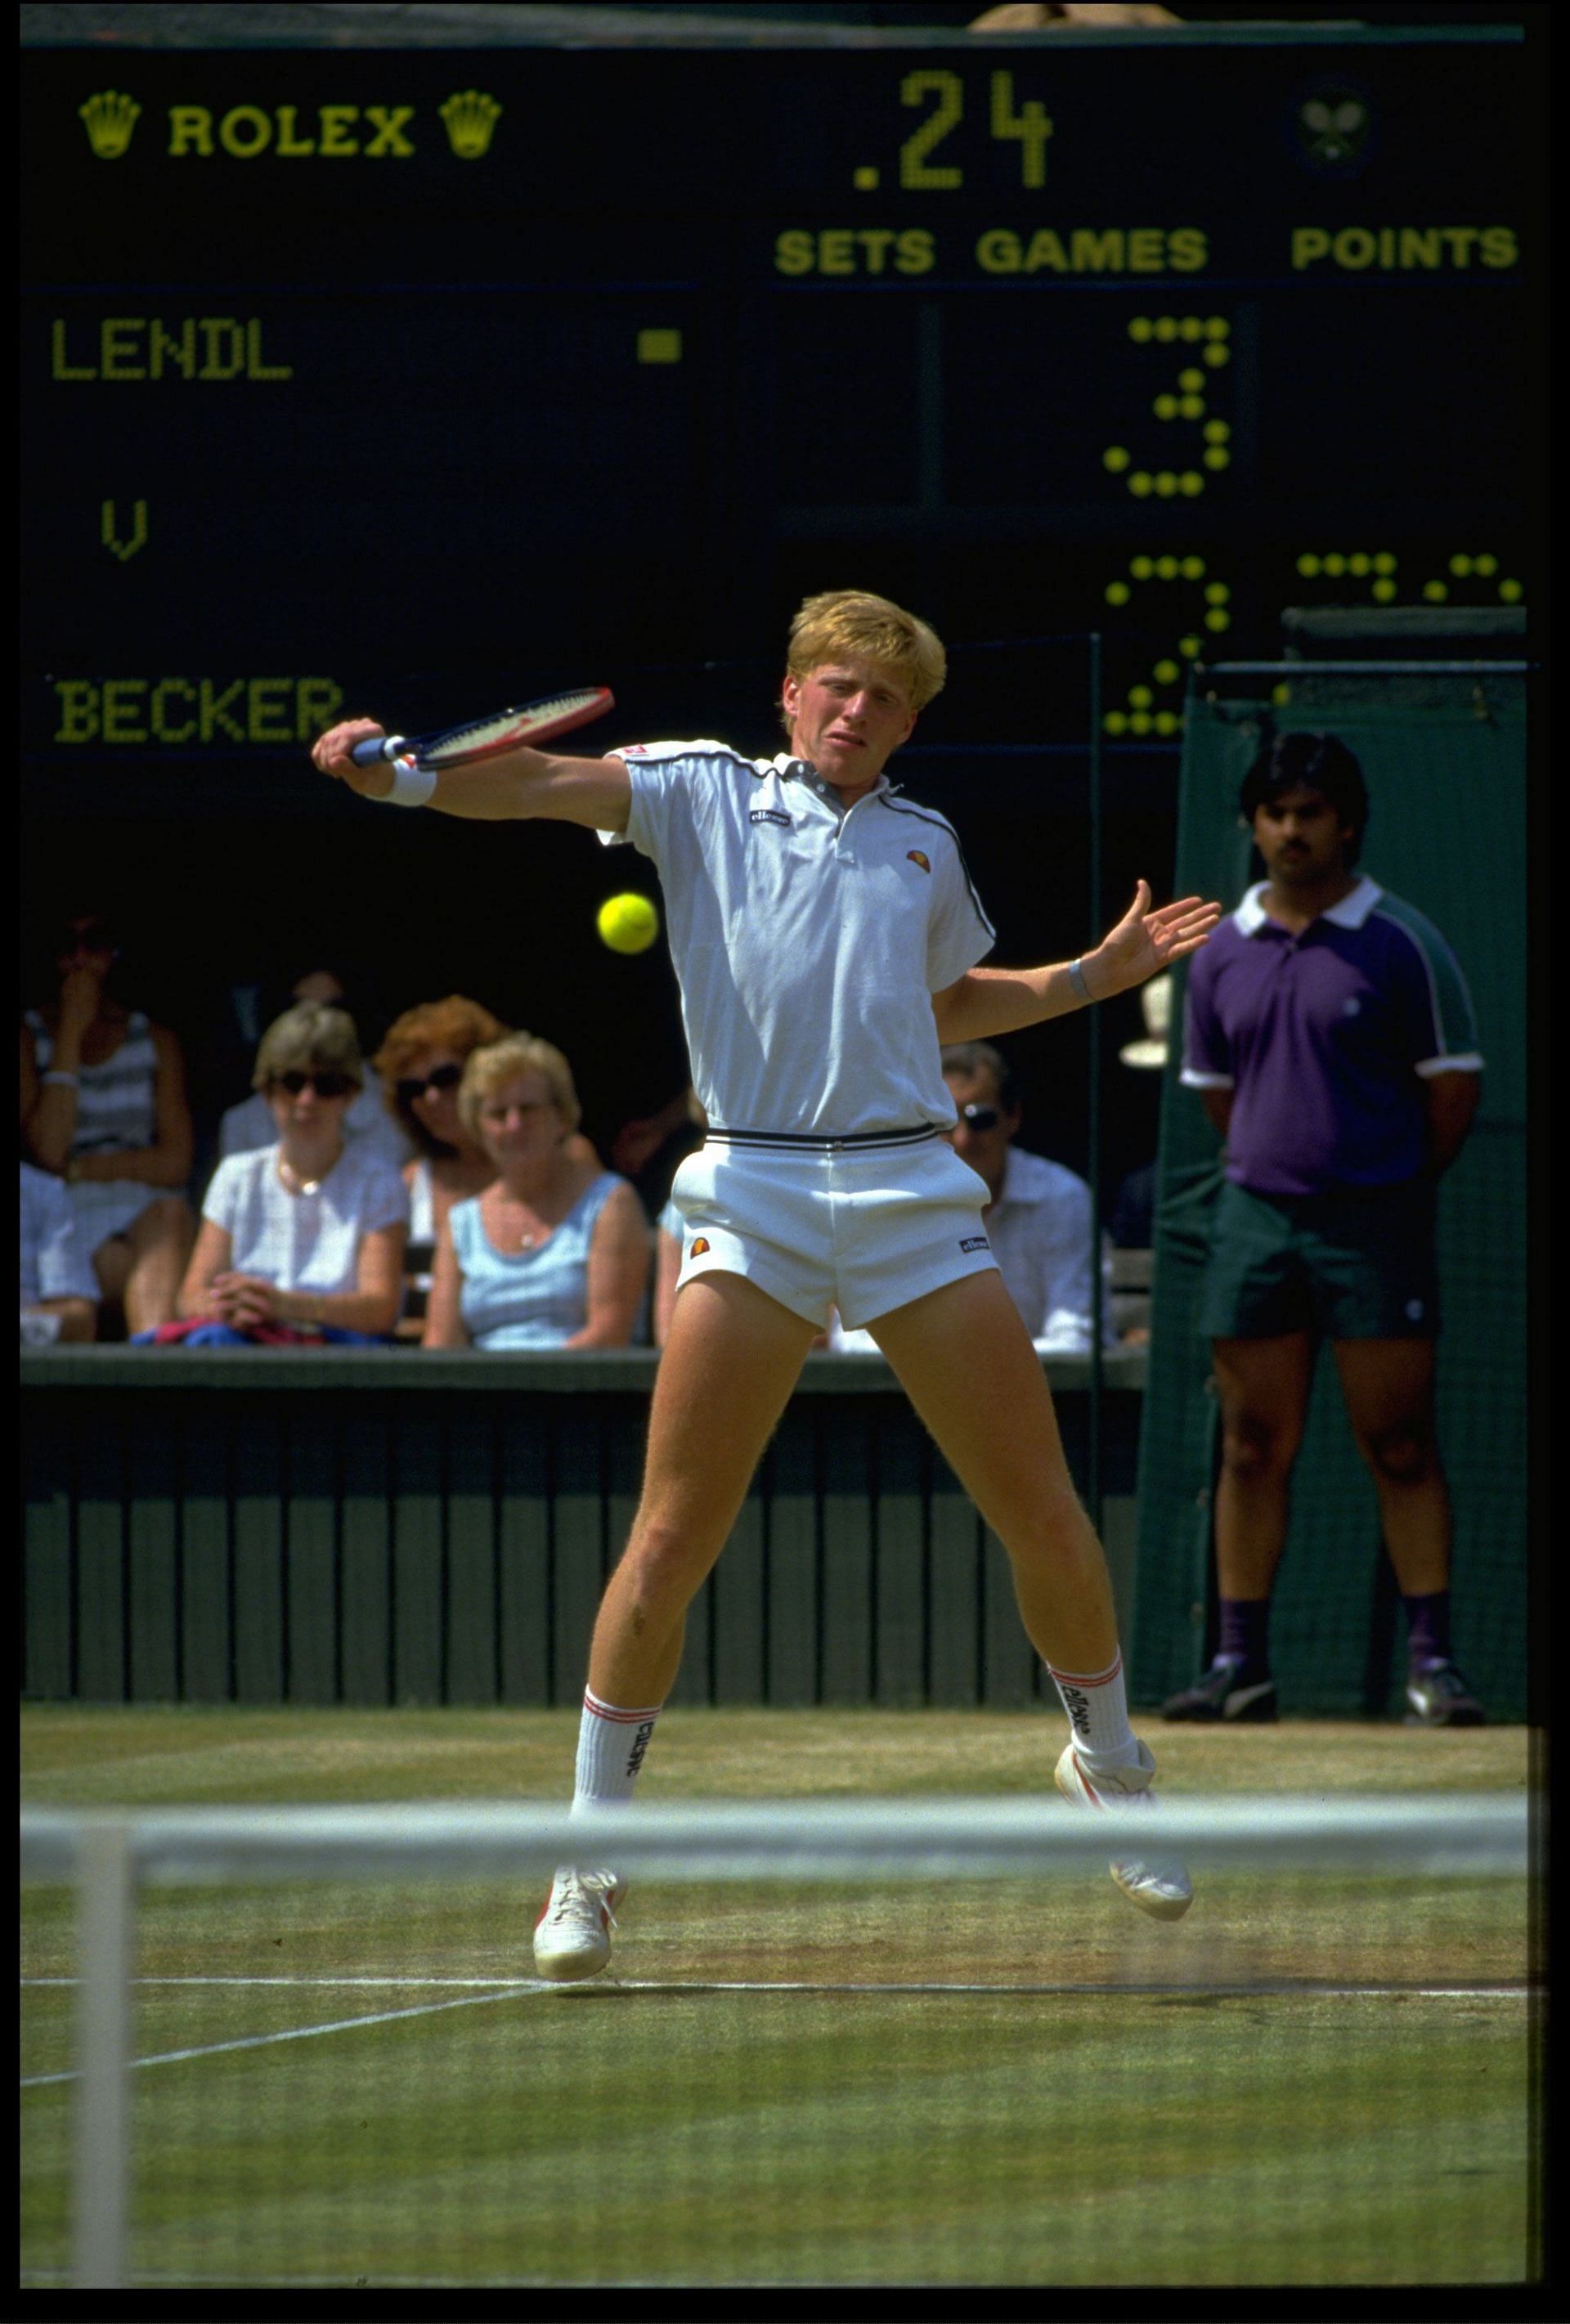 Boris Becker successfully defended his Wimbledon title in 1986